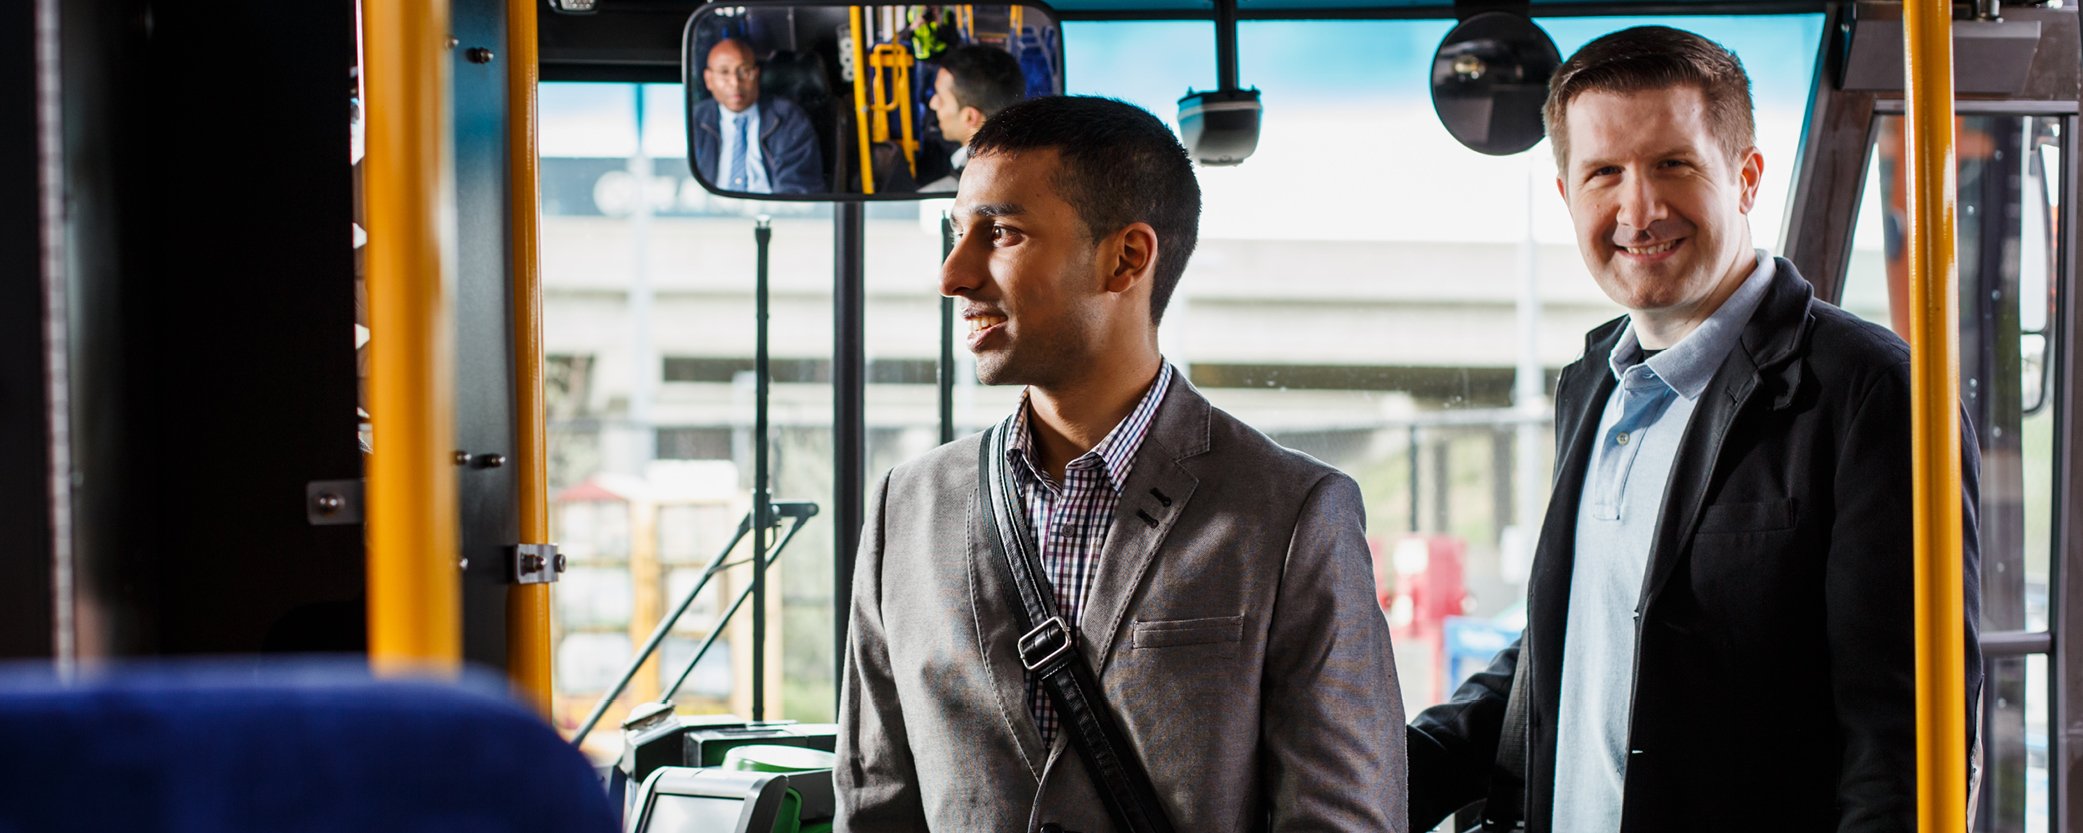 photo of two males in business clothing boarding bus